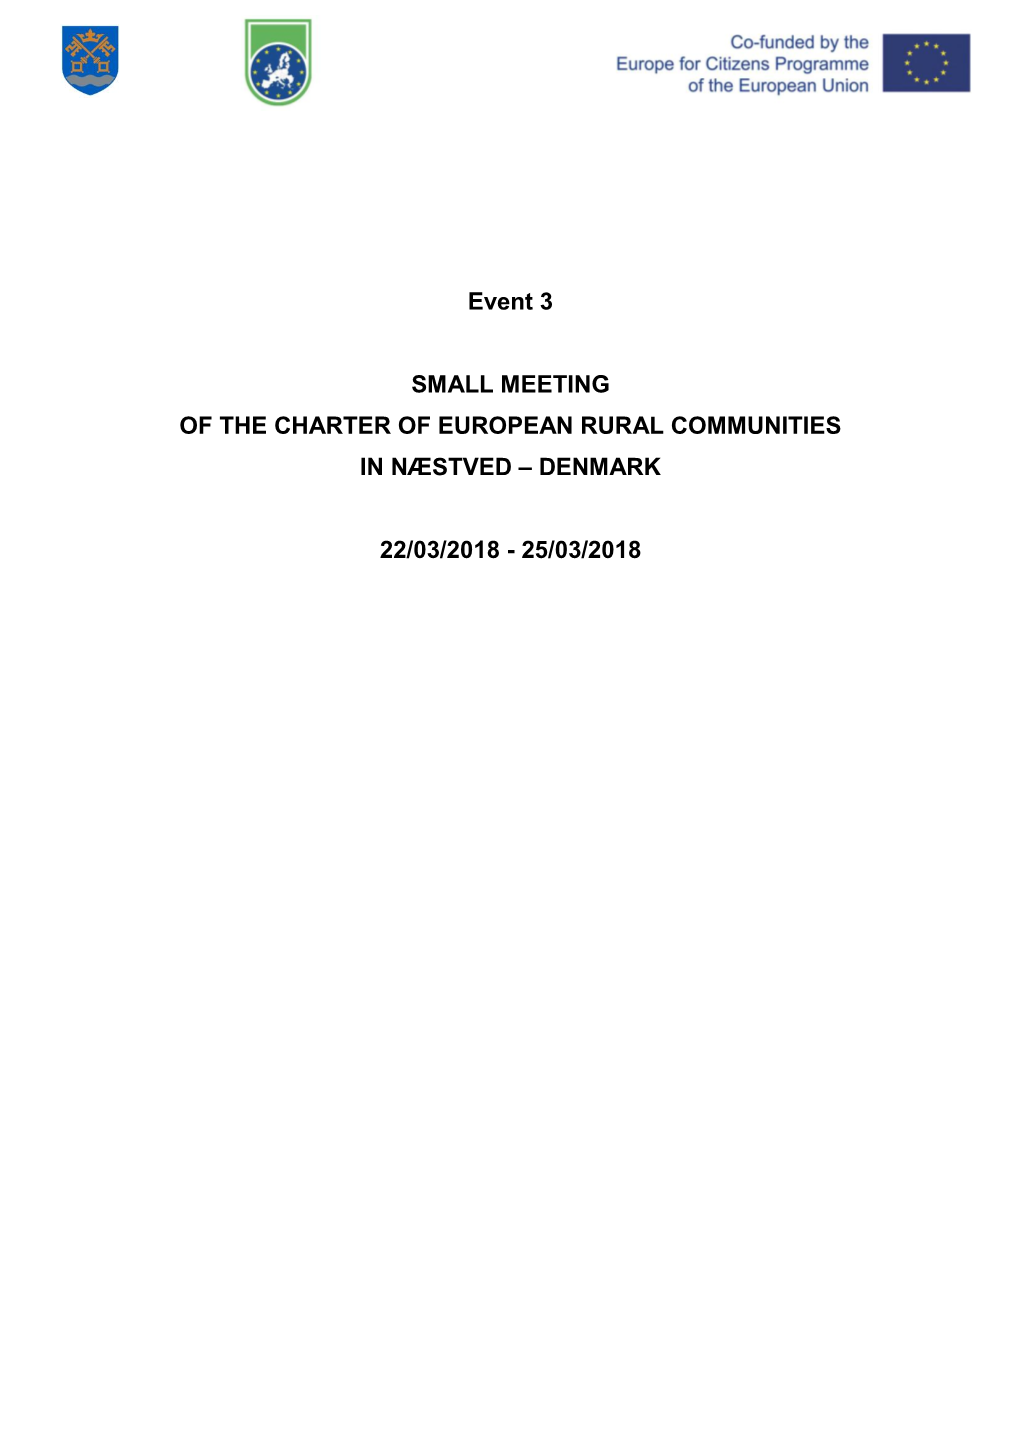 Event 3 SMALL MEETING of the CHARTER of EUROPEAN